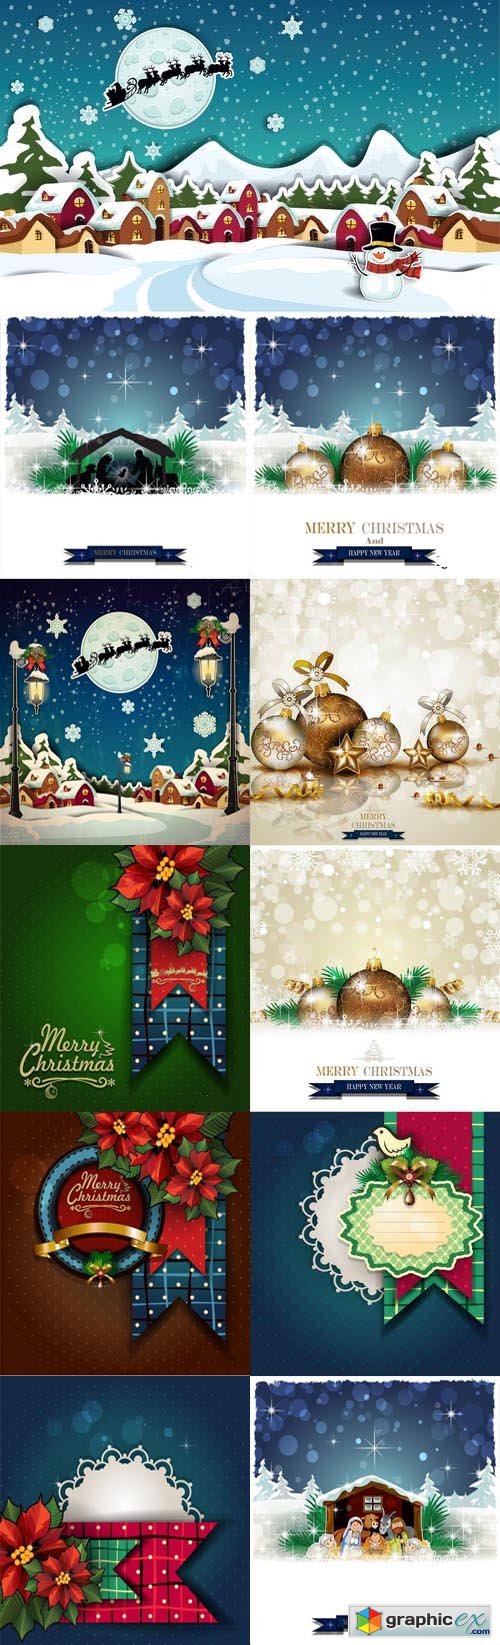 Stock Vector - Christmas Background & Elements